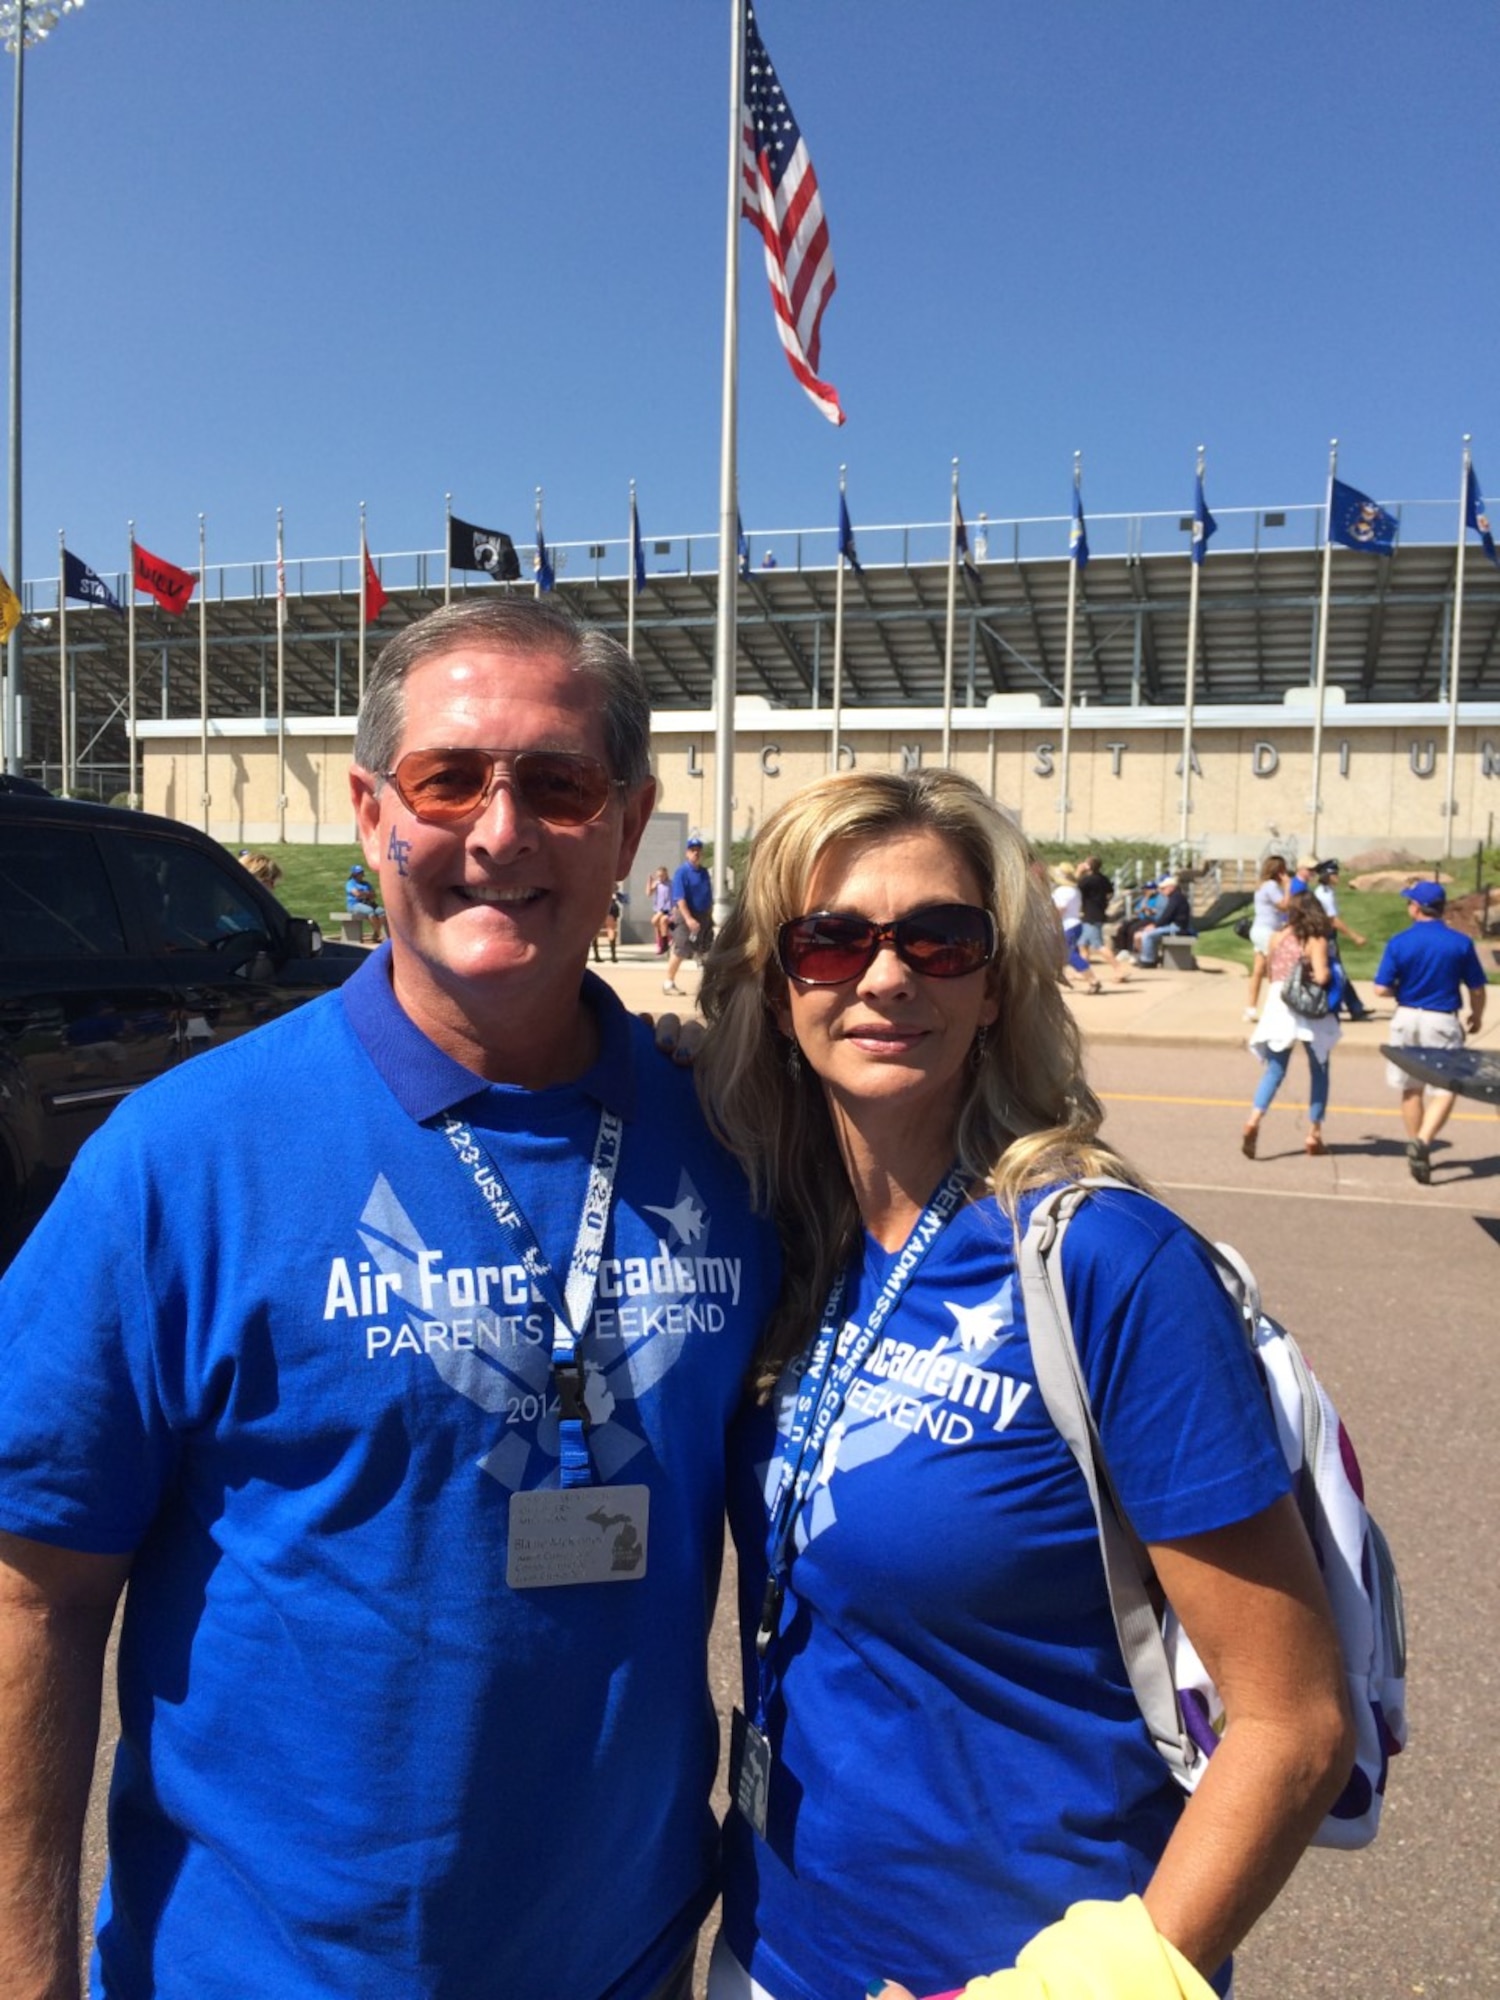 Blaine and Becky Mckinney show off their Air Force Academy pride. Their three sons, Austin, Connor and Lucas graduated from the Academy, and their family has a heritage of service dating back four generations. (Courtesy Photo)